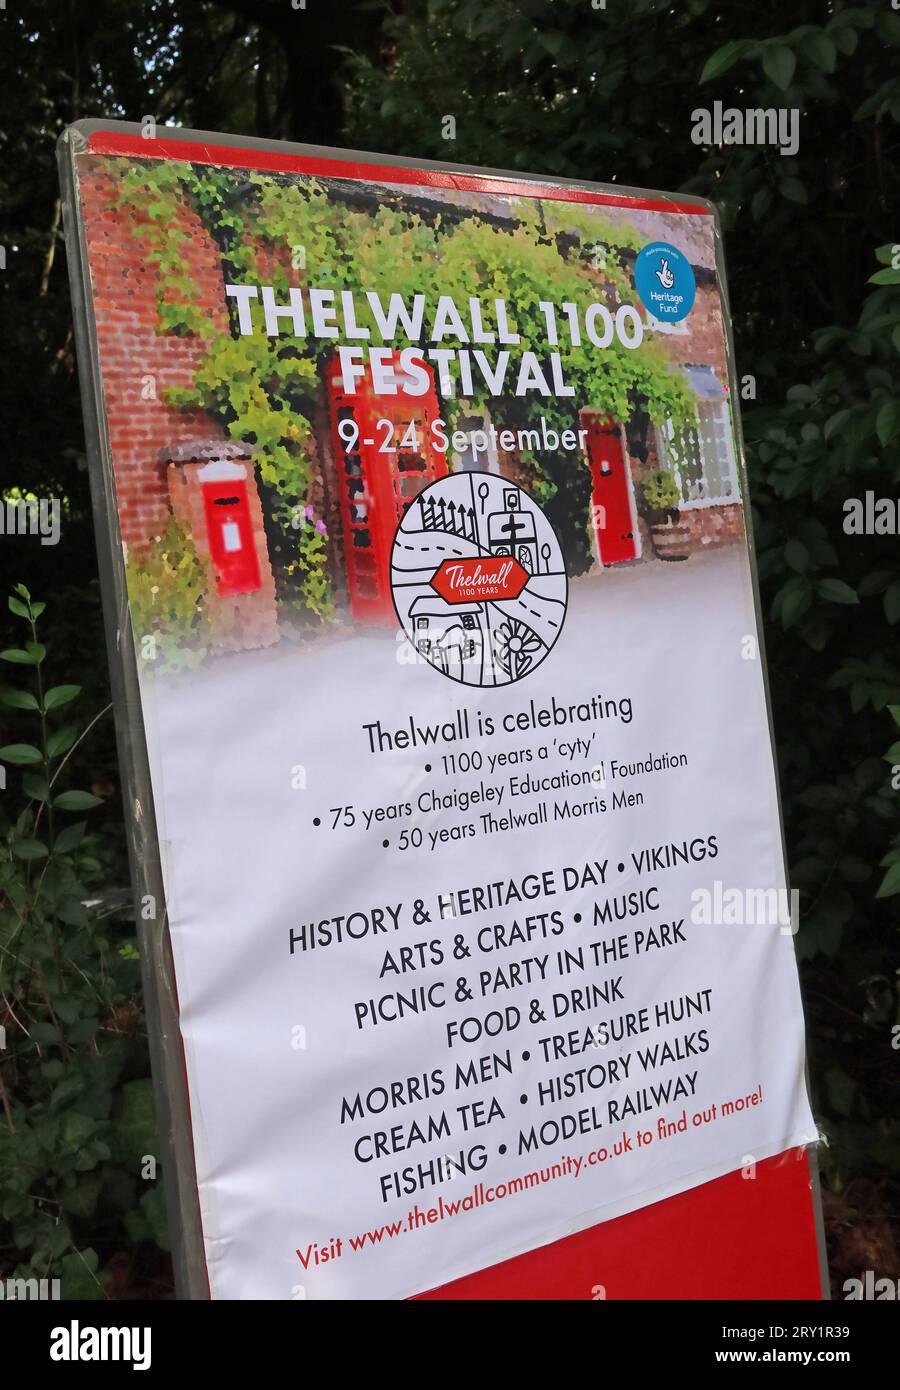 Affiche au festival Thelwall 1100 Years 9-24th septembre 2023 History & Heritage Day, Warrington, Cheshire, Angleterre, Royaume-Uni, WA4 2SU Banque D'Images